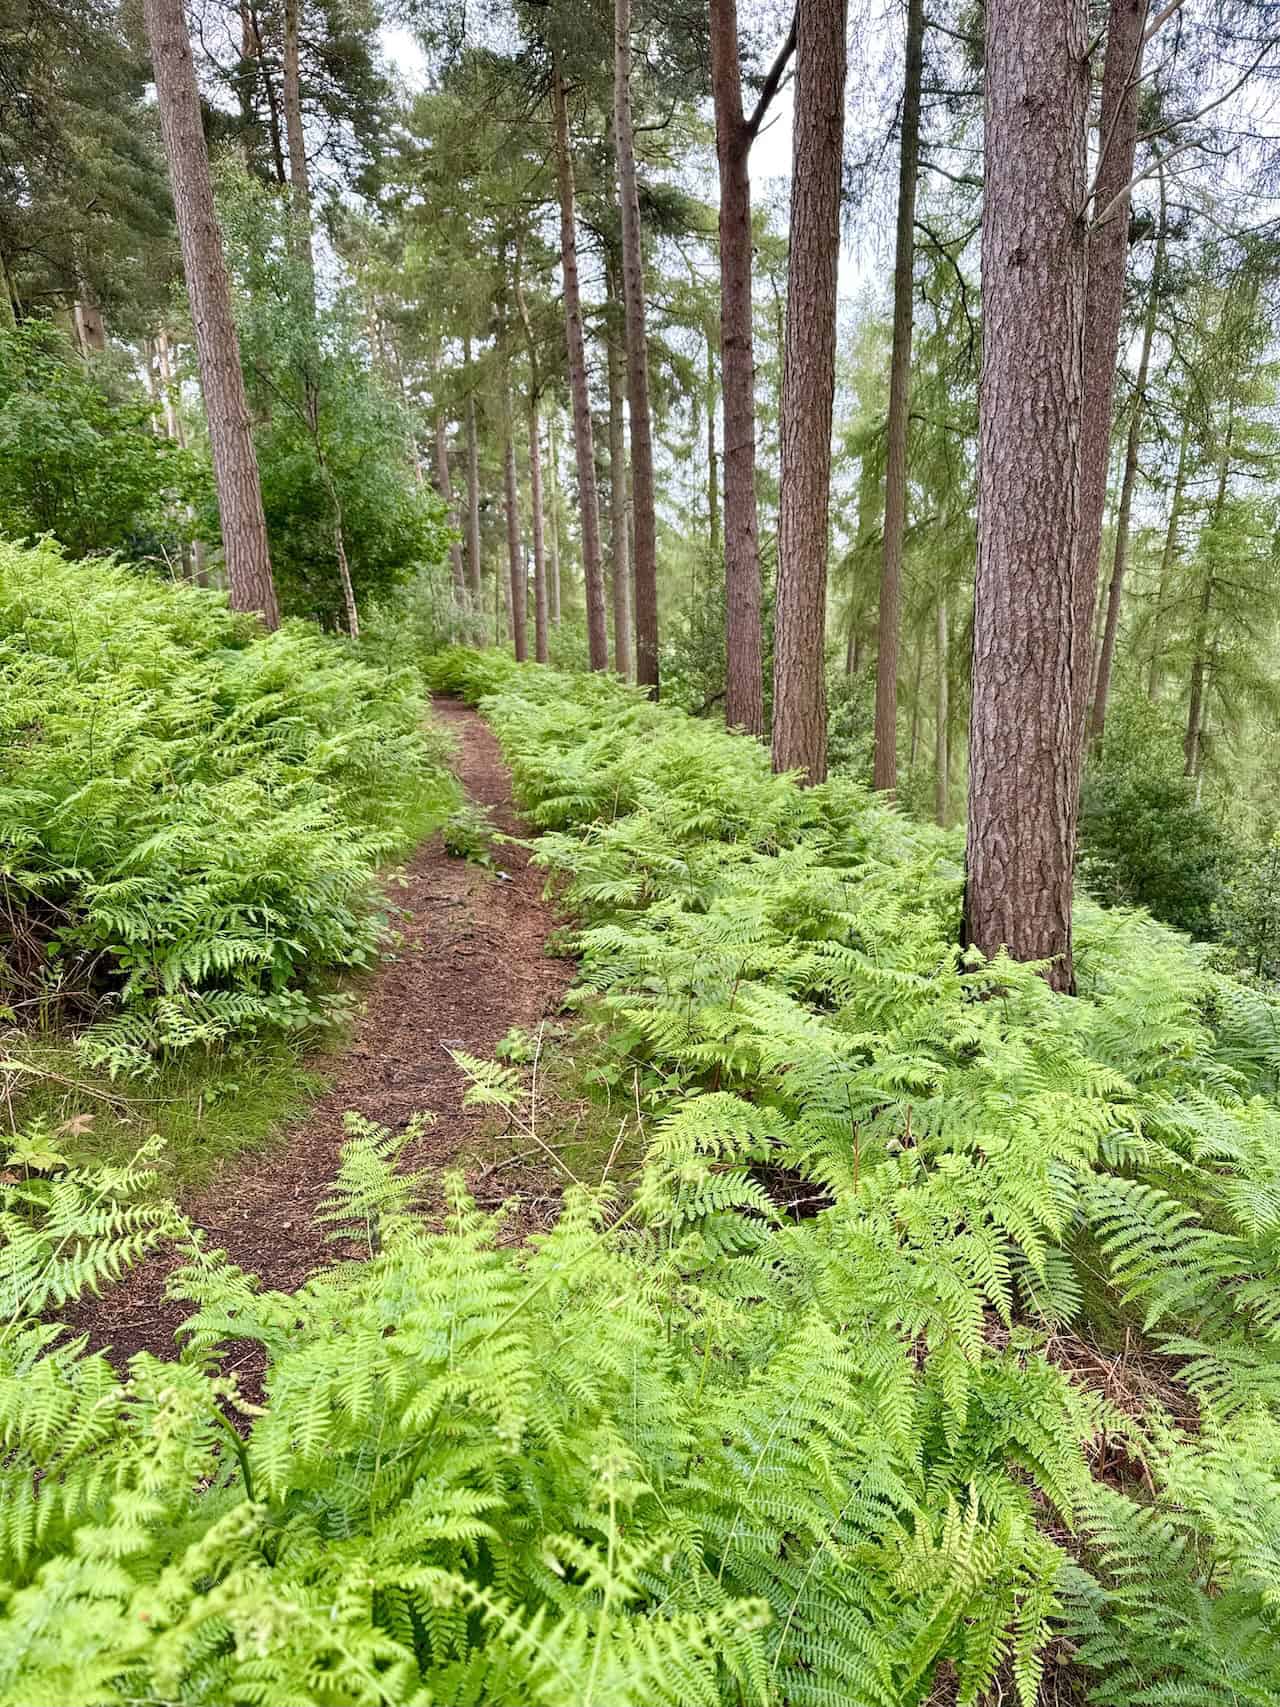 The path along the eastern side of the woods is picturesque, easy to walk along, and peaceful, lined with tall pine trees. It is a highlight of this Helmsley circular walk and about two-thirds of the way round.